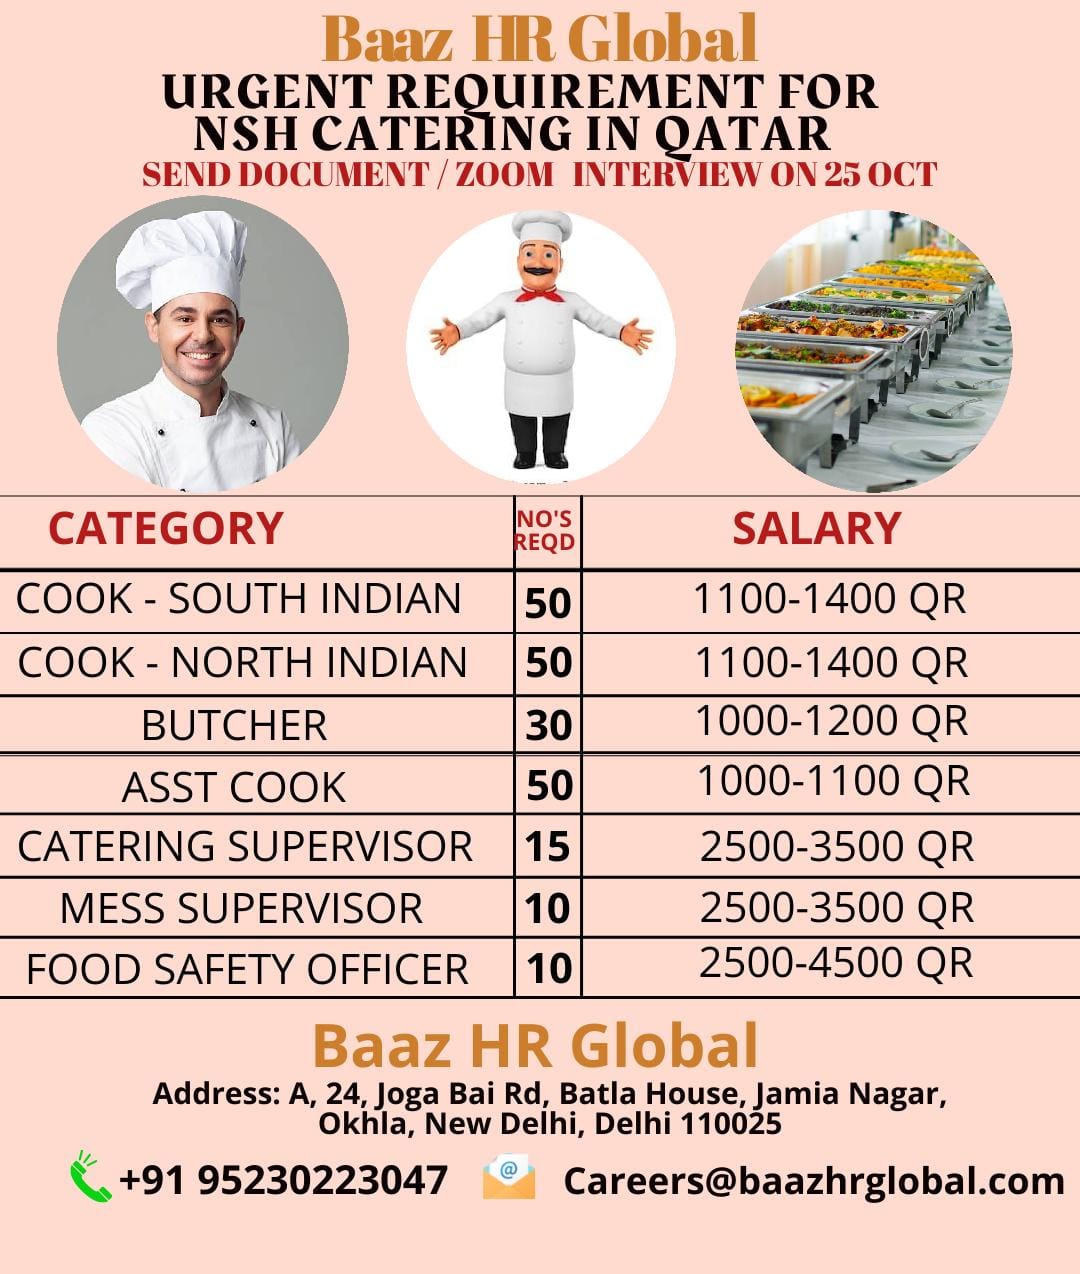 Requirement For NSH Catering In Qatar